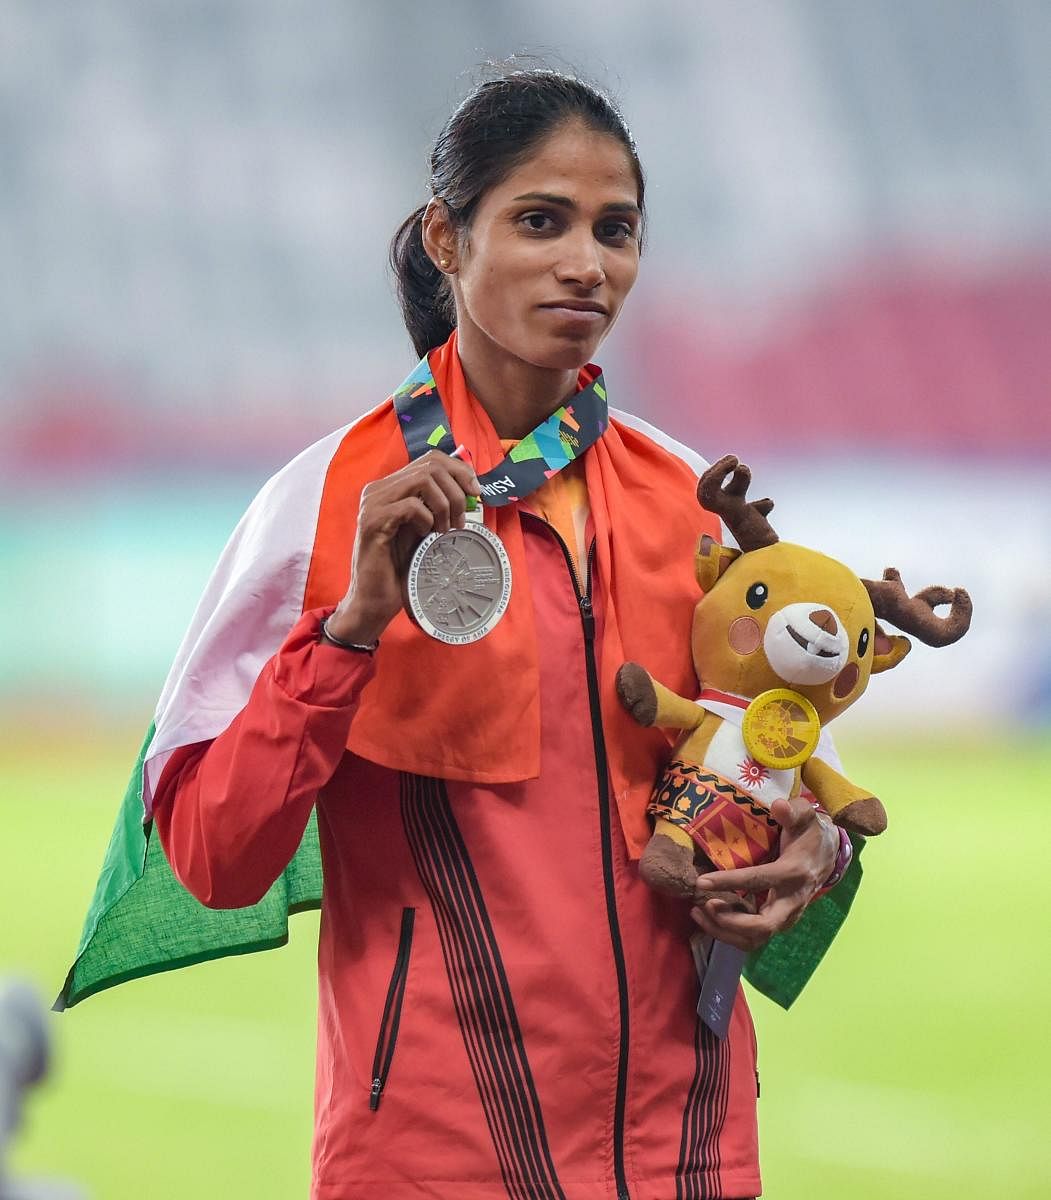 Silver medallist India's Steeplechase athlete Sudha Singh poses for photographs during the 18th Asian Games Jakarta - Palembang 2018, in Jakarta on Monday, Aug 27, 2018. (PTI Photo)